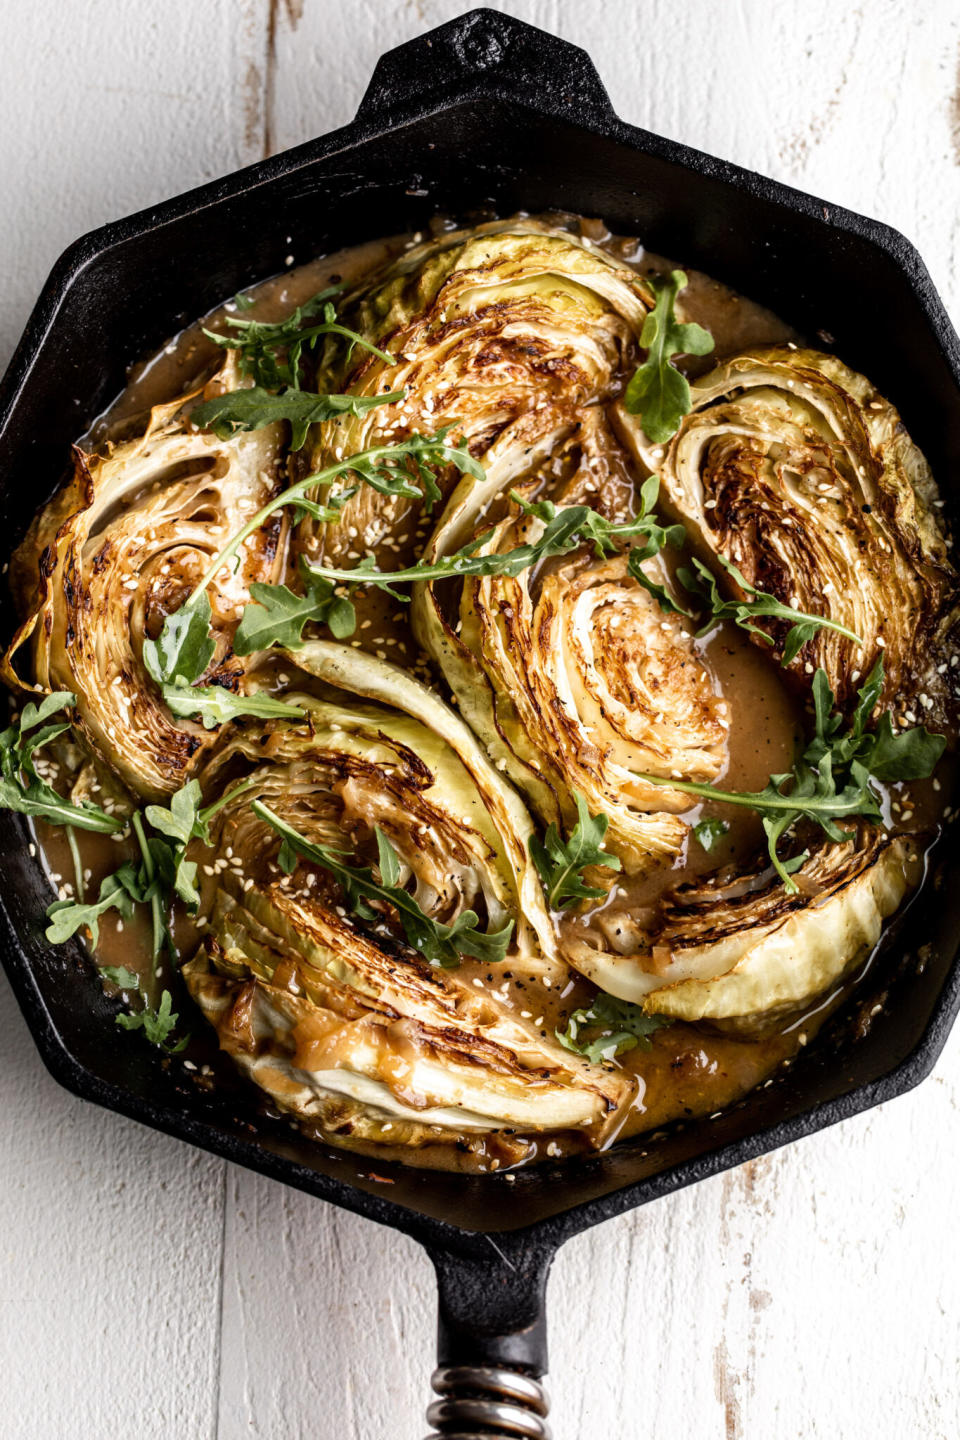 A skillet of Miso Braised Cabbage.